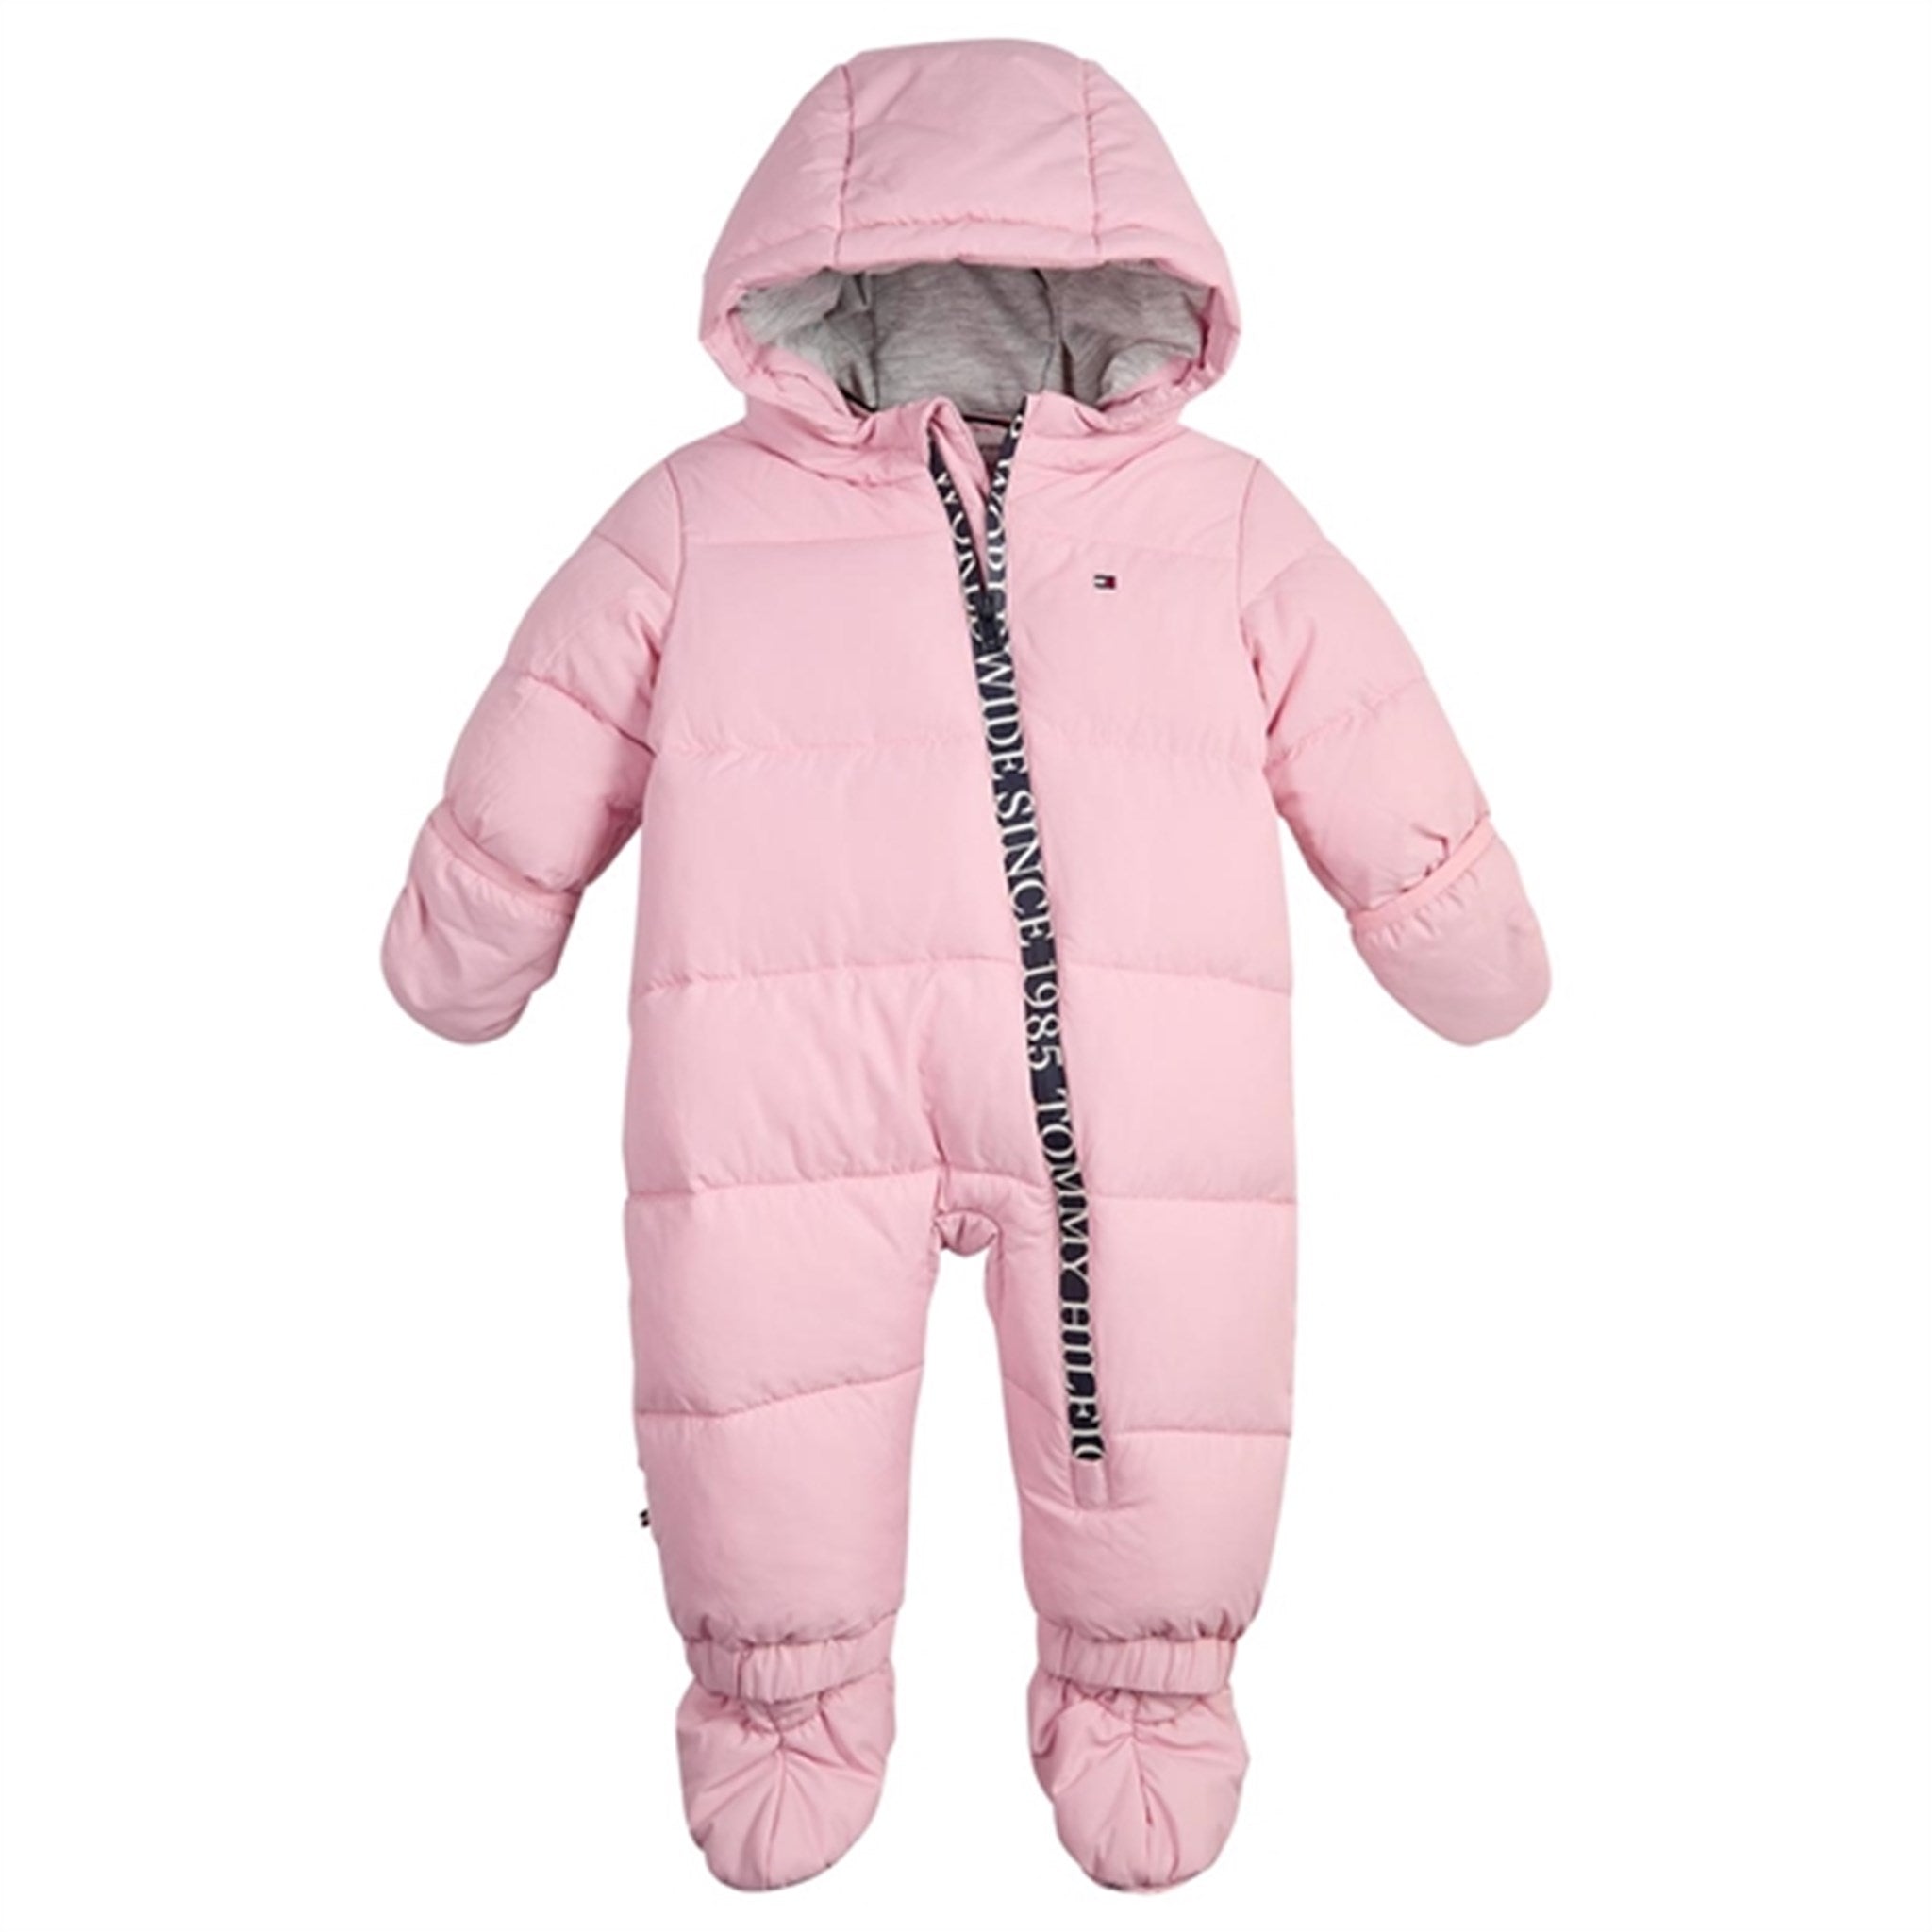 Tommy Hilfiger Baby Branded Zip Skisuit Pink Shade